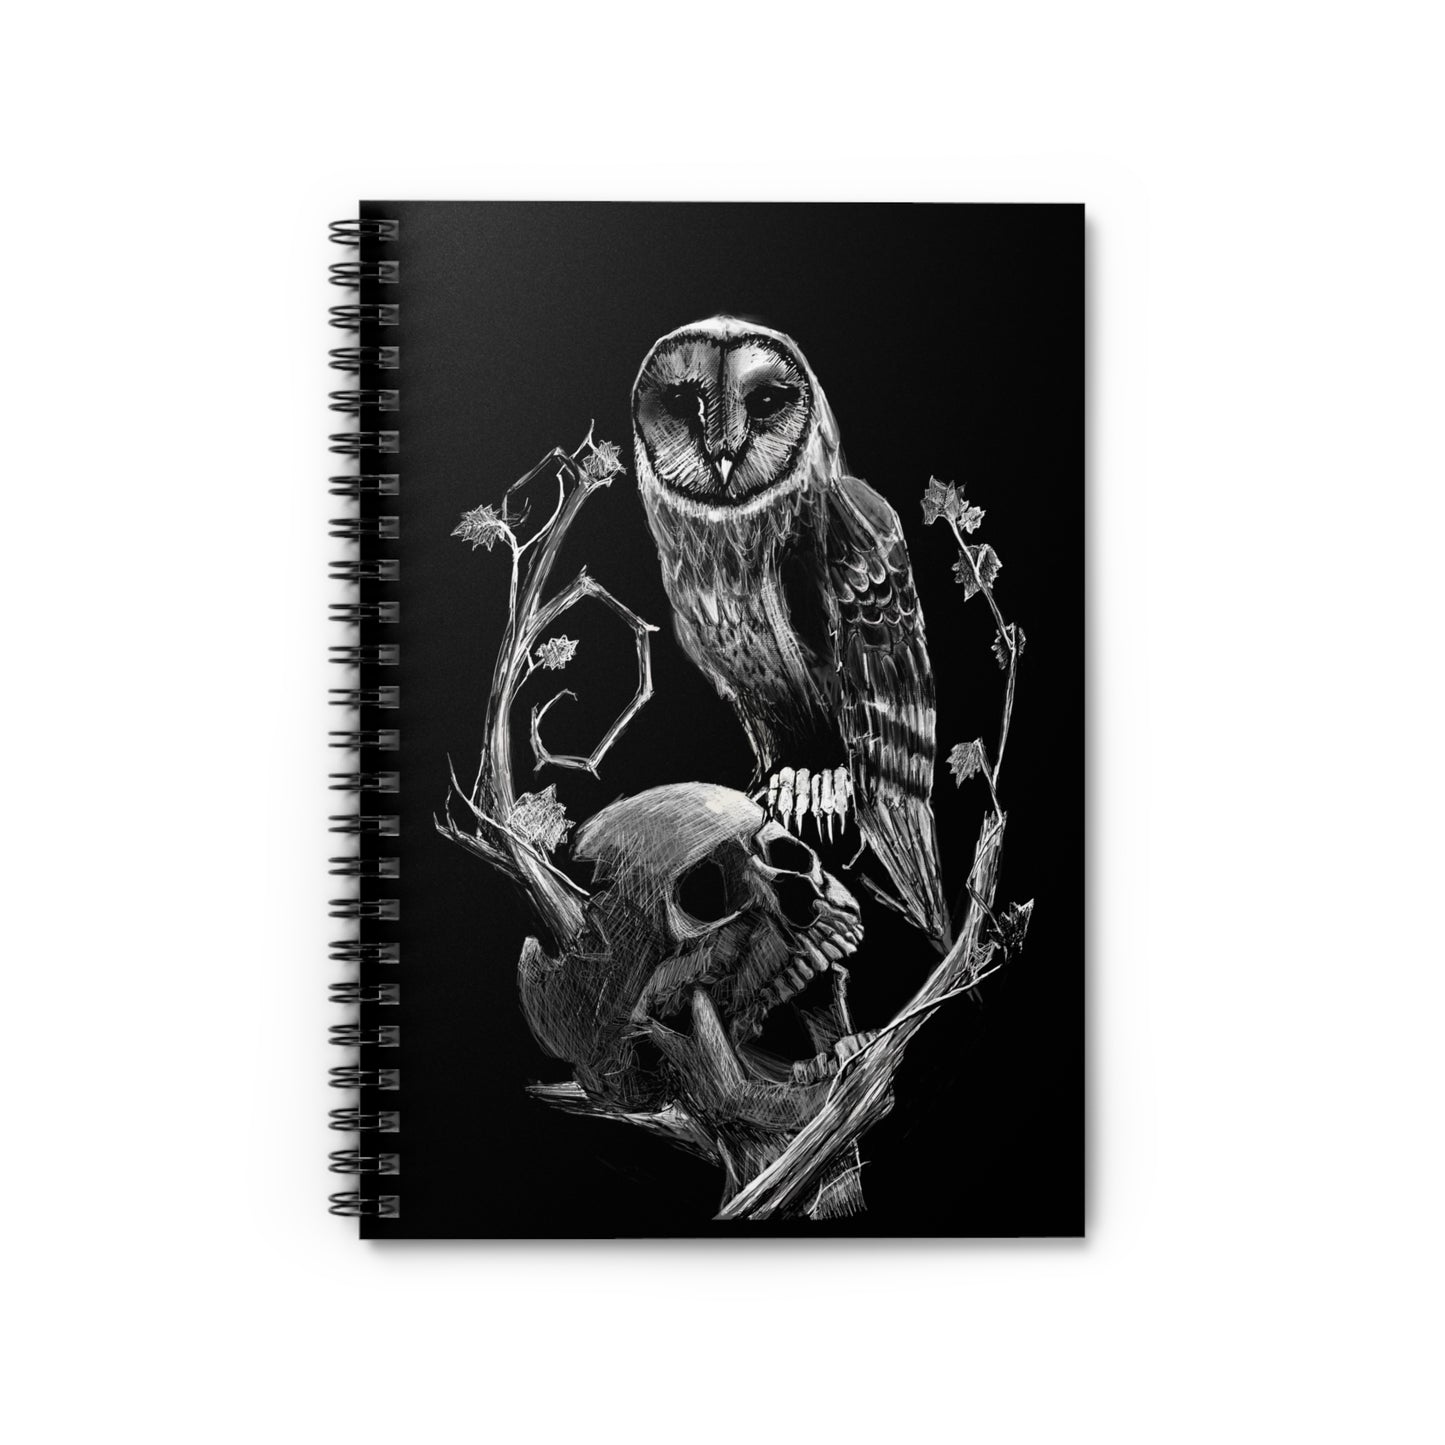 Skull and Owl Spiral Notebook - Ruled Line